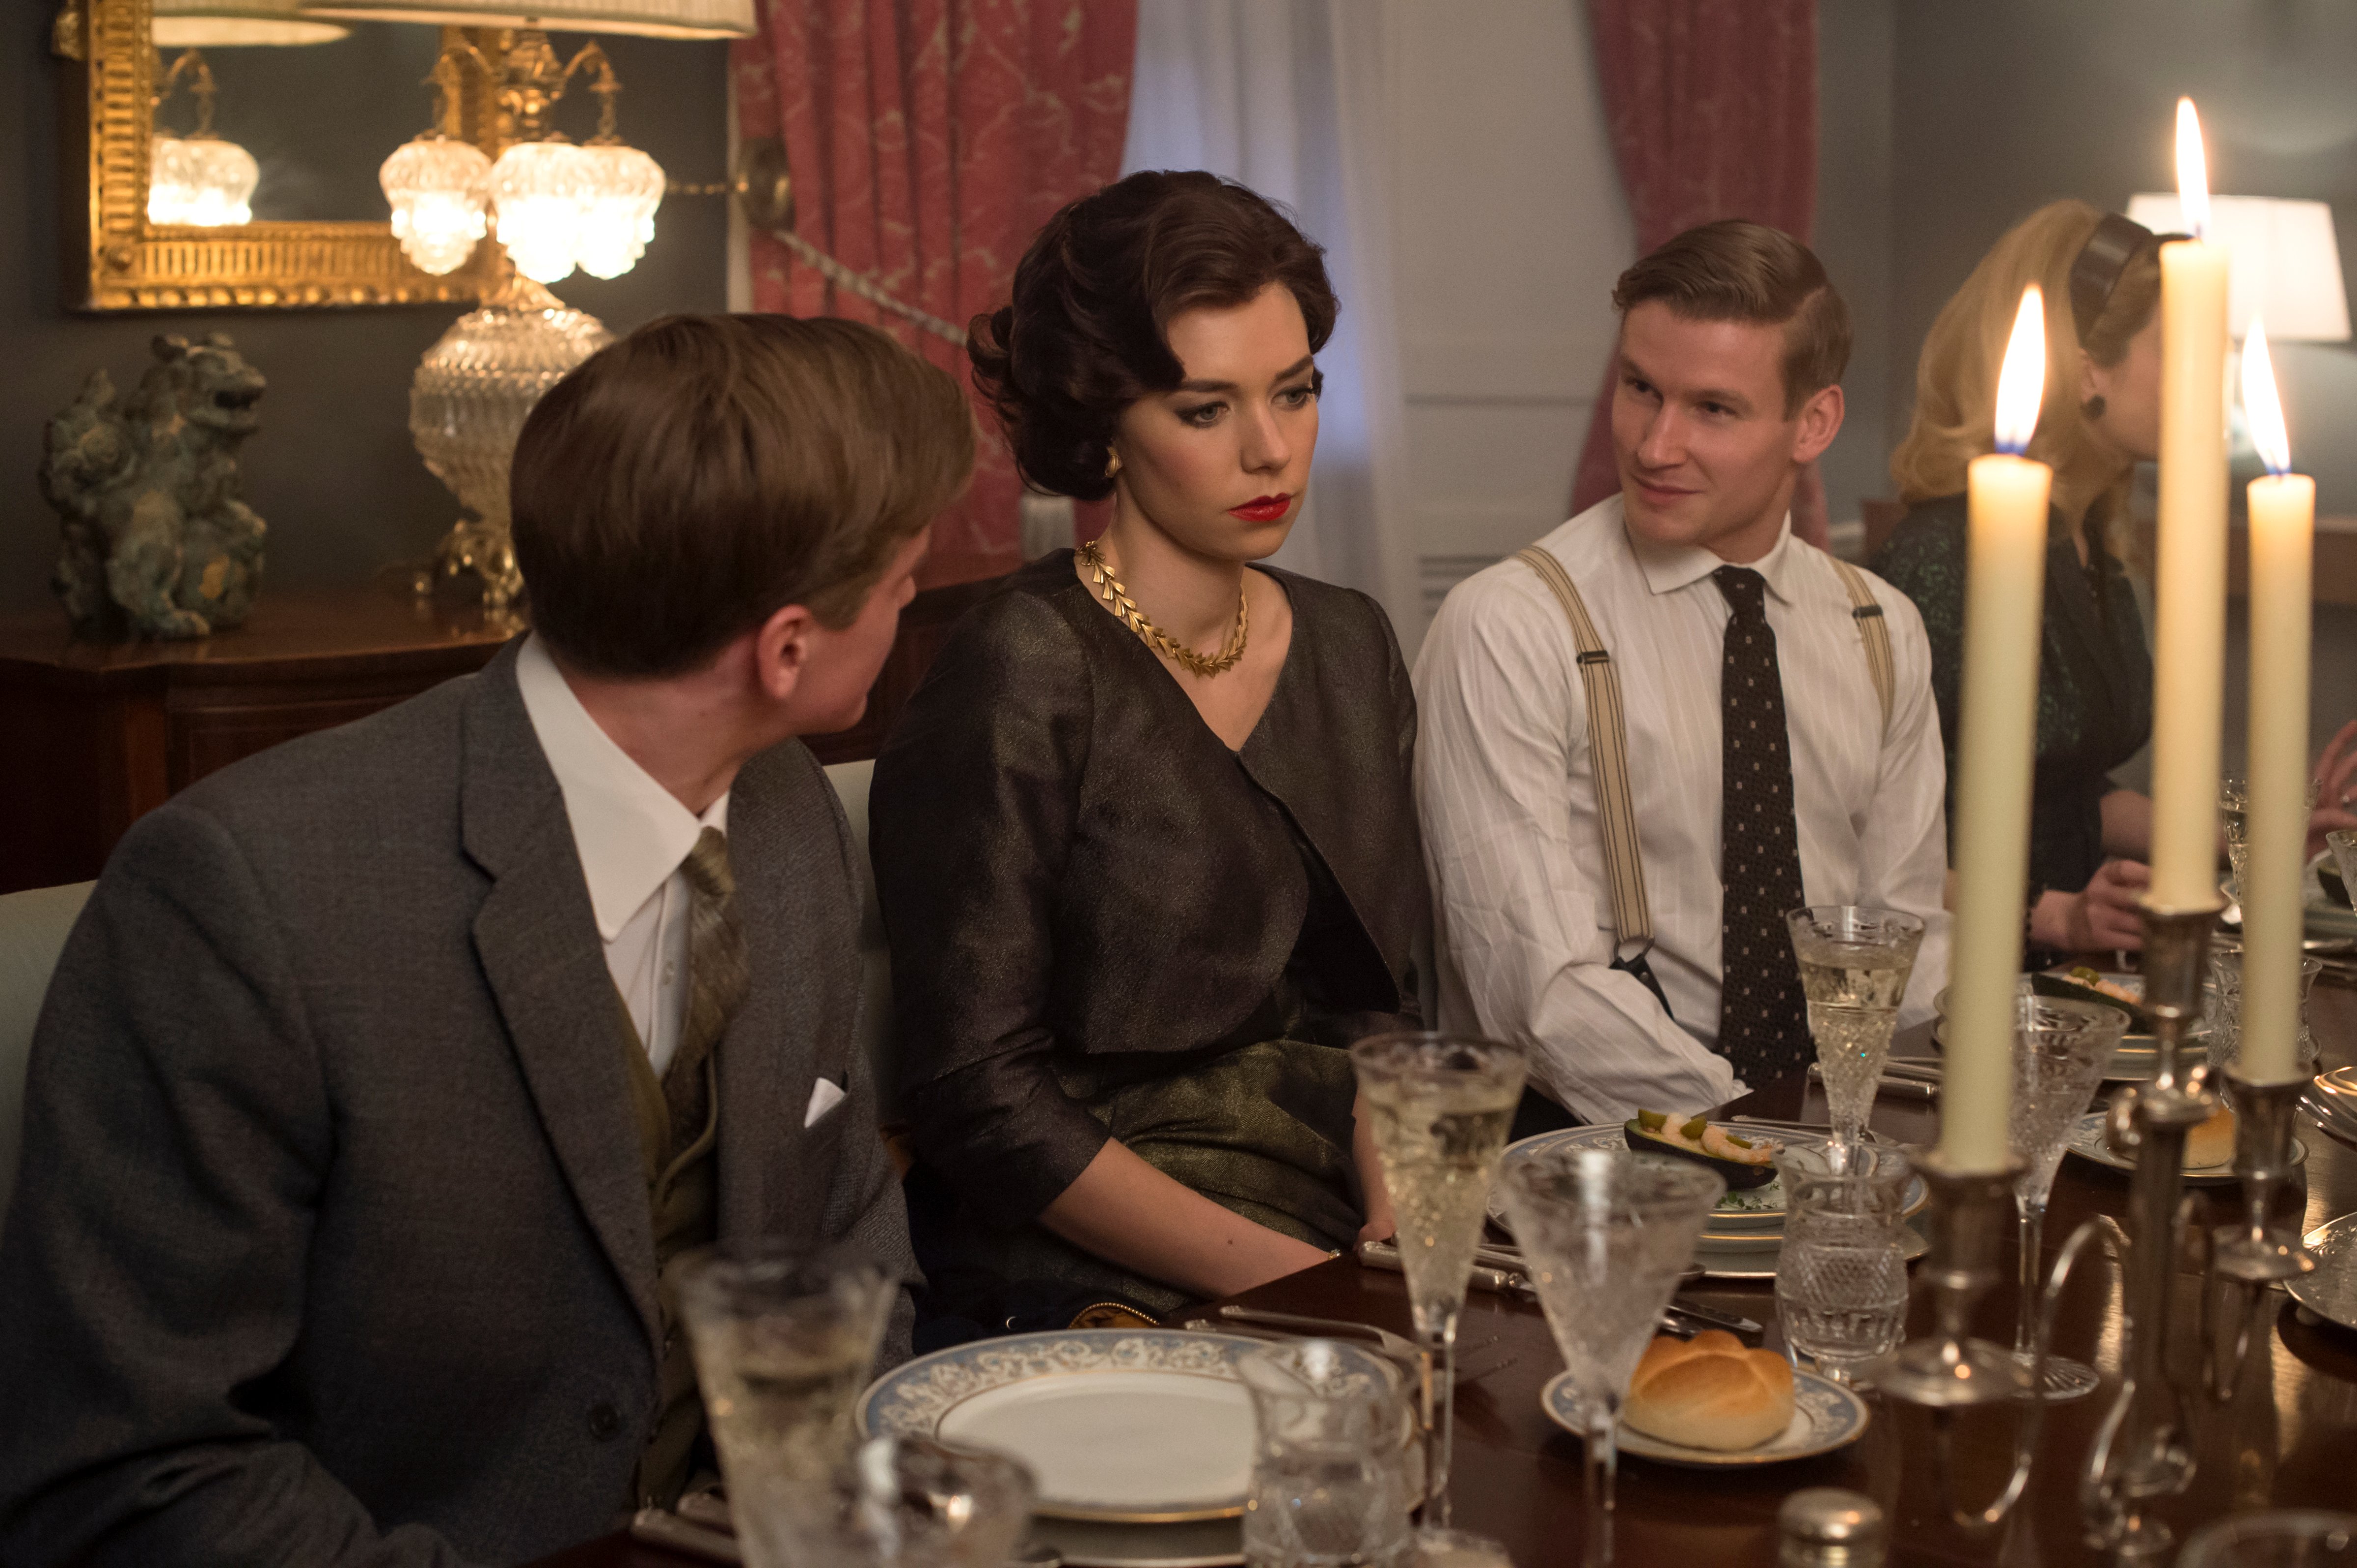 Princess Margaret and guests sit for supper at Elizabeth Cavendish's party in The Crown. (Alex Bailey / Netflix)